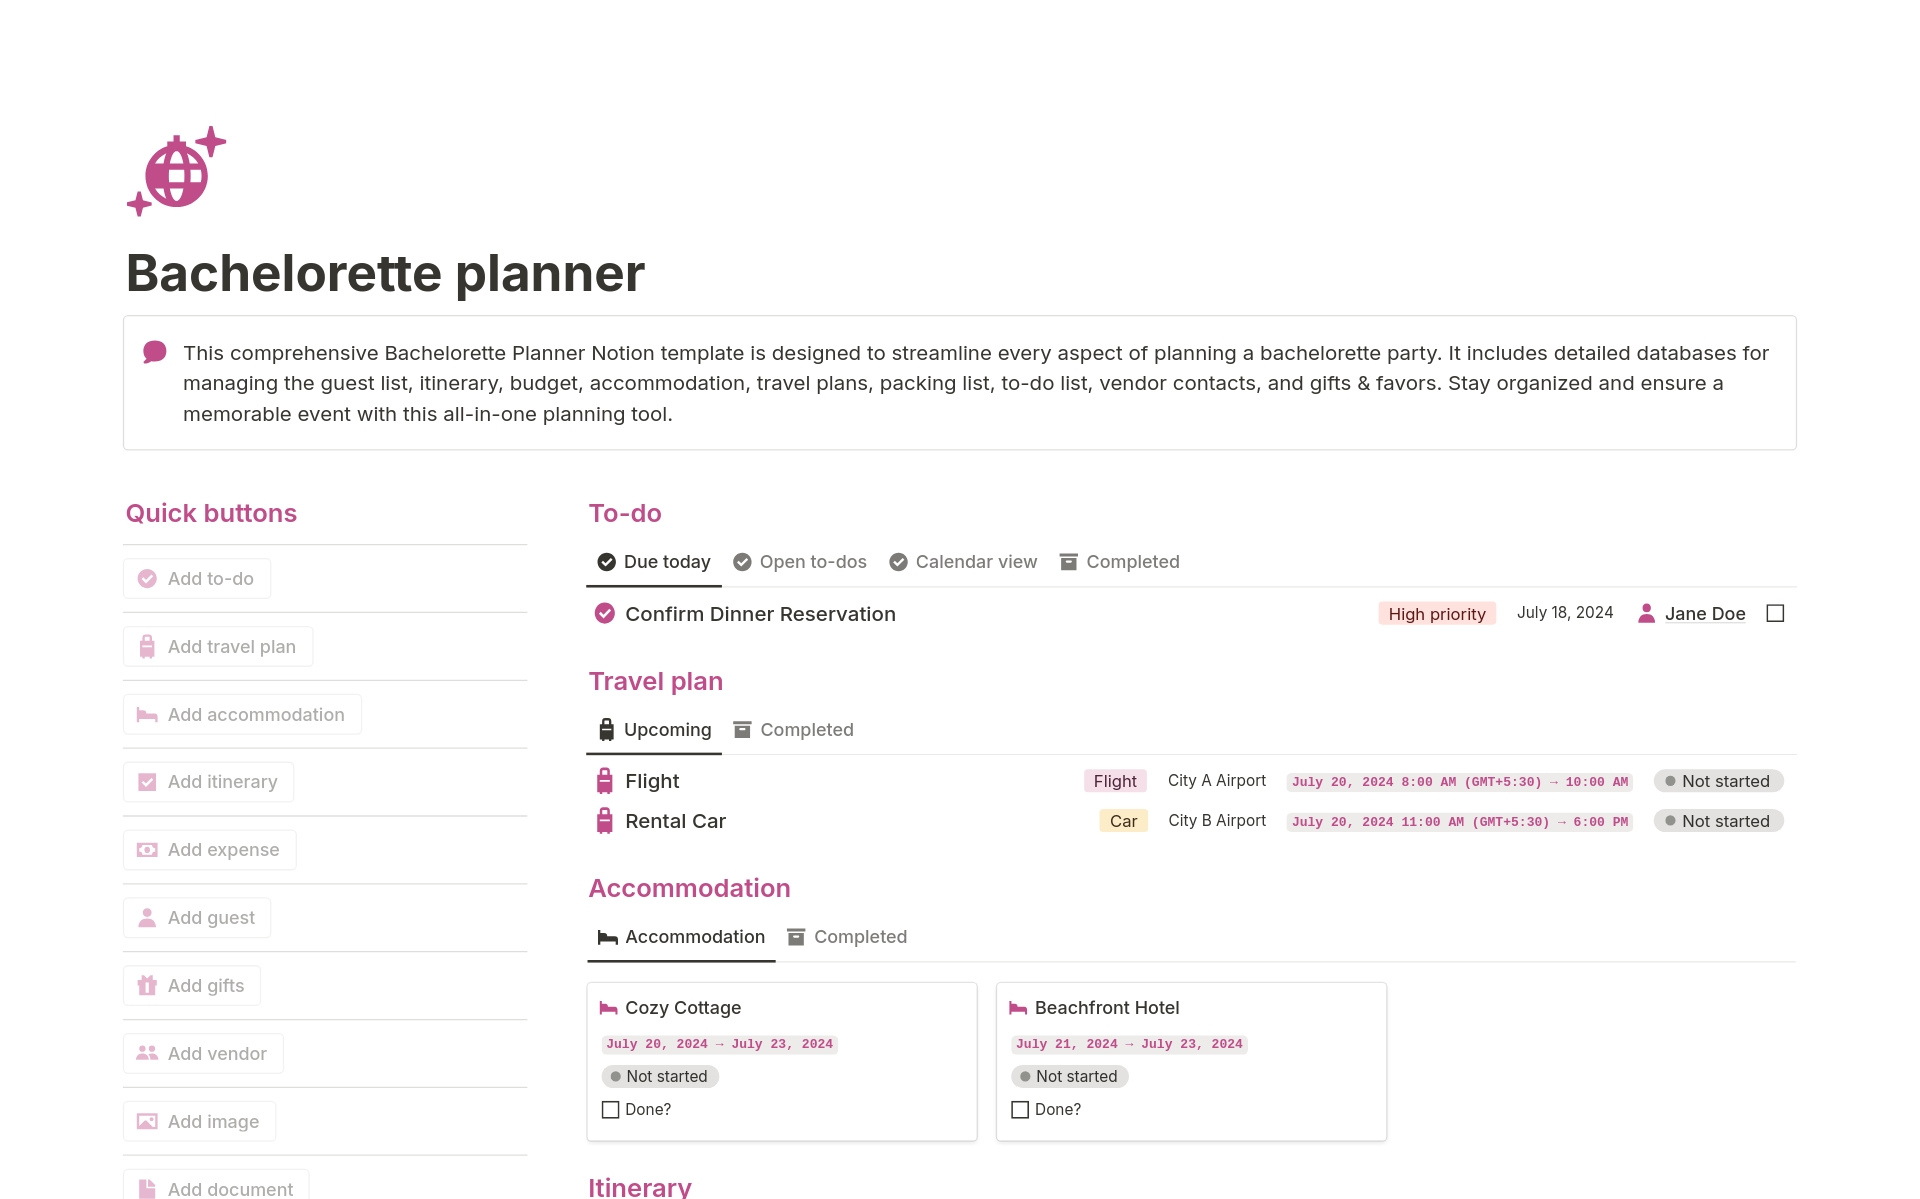 This template is designed to streamline every aspect of planning a bachelorette party. It includes detailed databases for managing the guest list, itinerary, budget, accommodation, travel plans, packing list, to-do list, vendor contacts, gifts & favors and more.